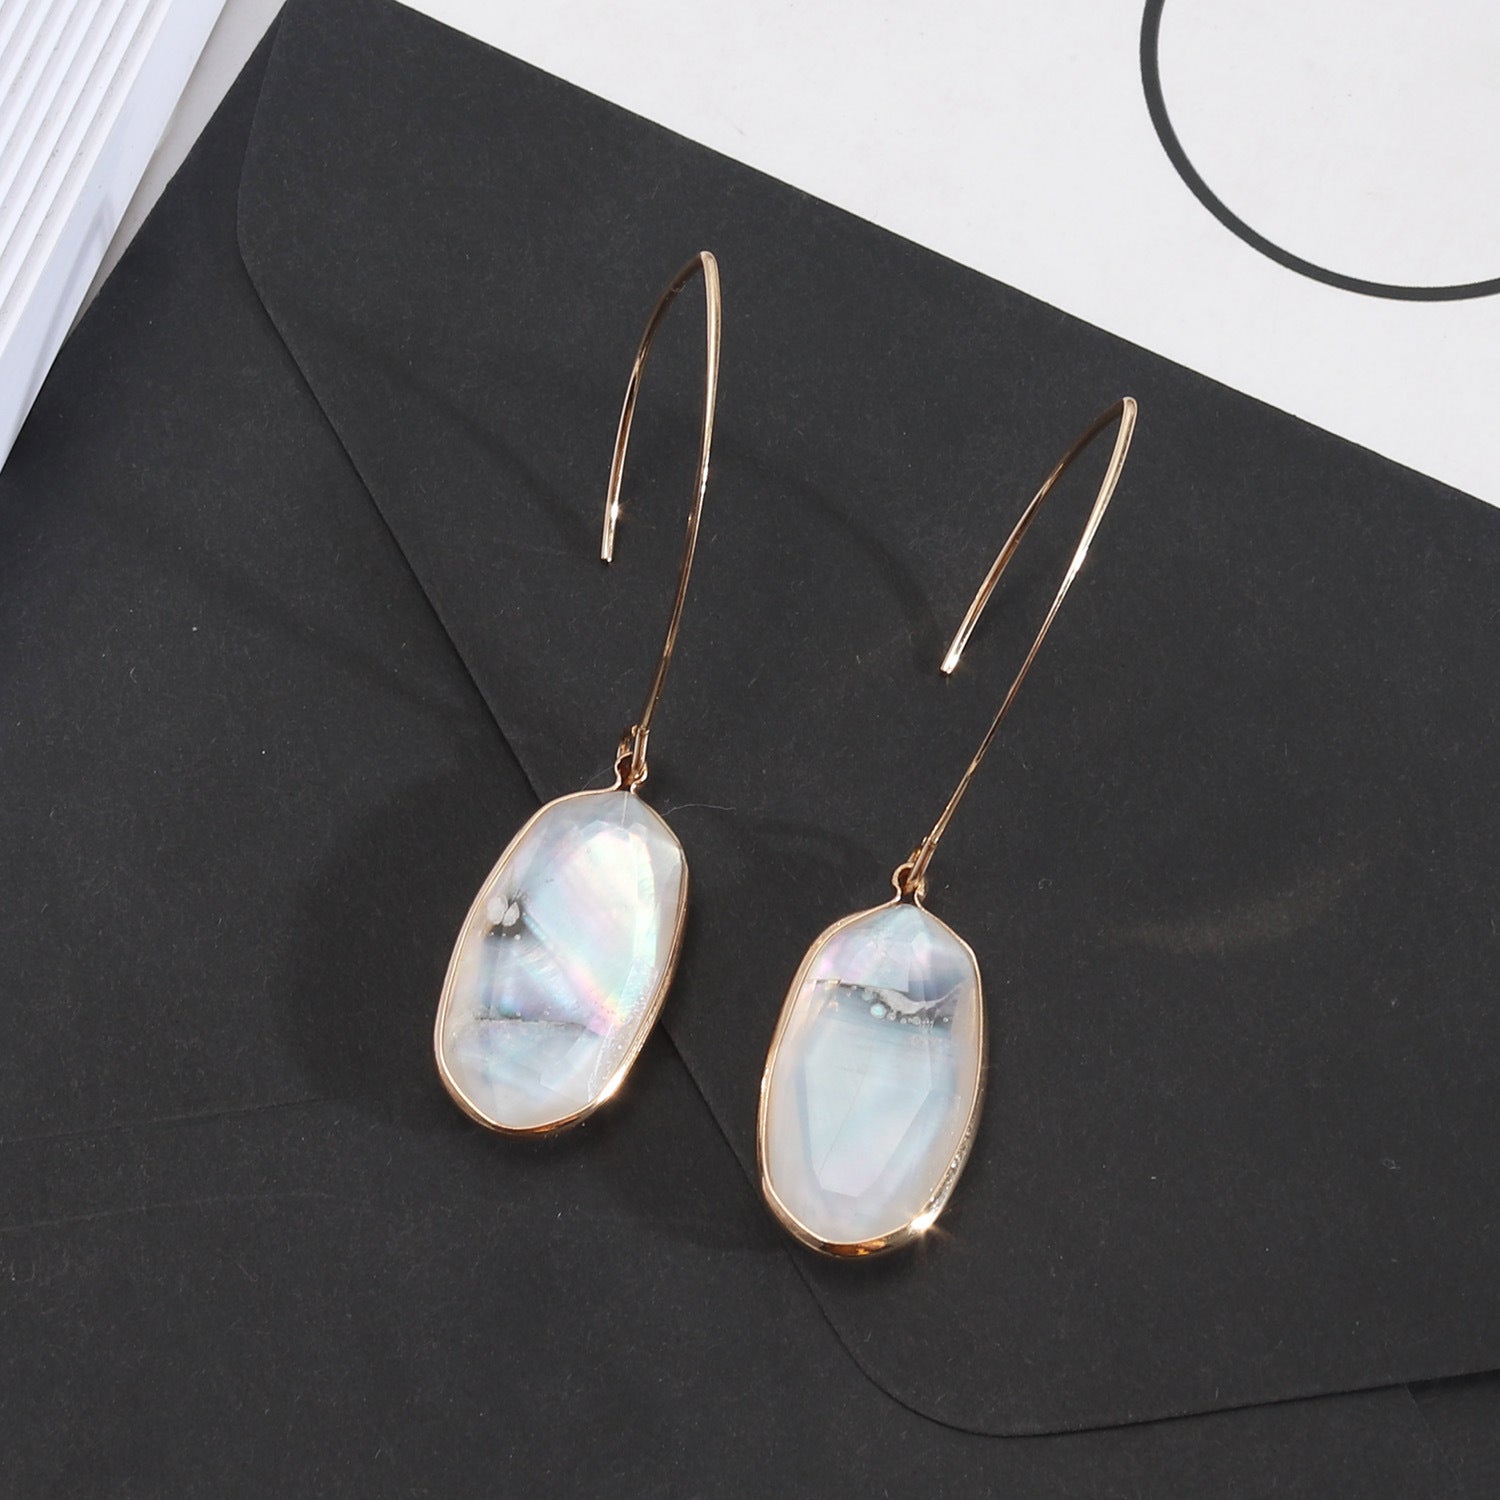 Oval Gold Plated Abalone Earrings, White Shell Earrings, Faceted Natural Seashell Jewelry AL515